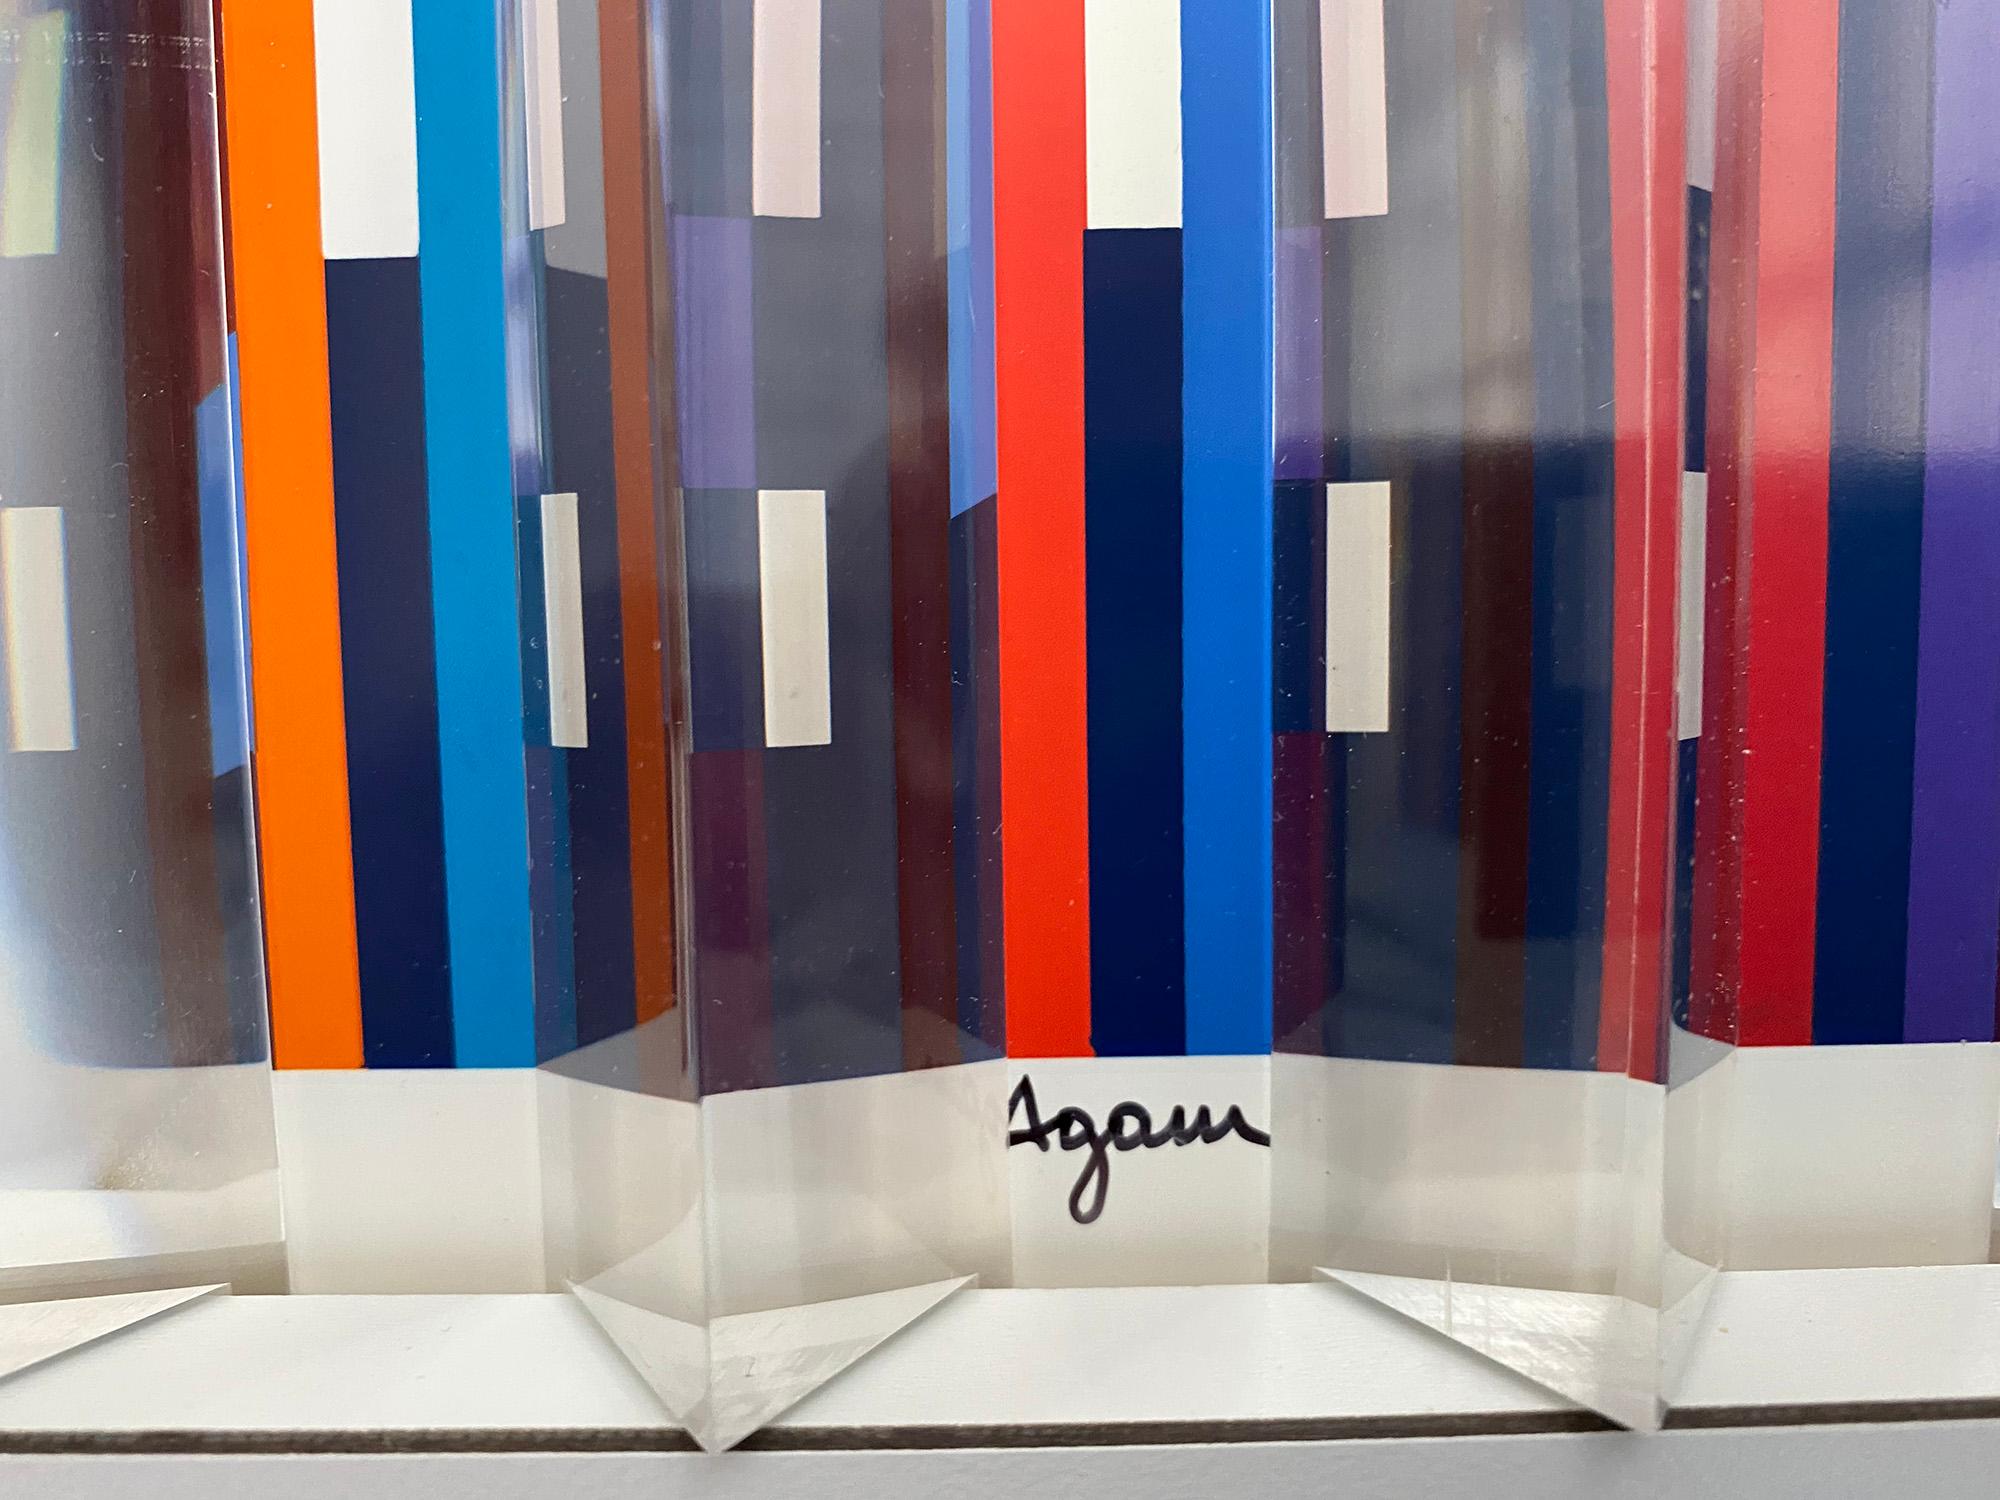 This piece by Yaacov Agam is an artist’s proof, 1 of 6 that was created by Duke Zimmerman from Zimmerman Editions in 1990, and who is the original printer of the series. The series was printed as the result of the approval by Agam of this proof. The